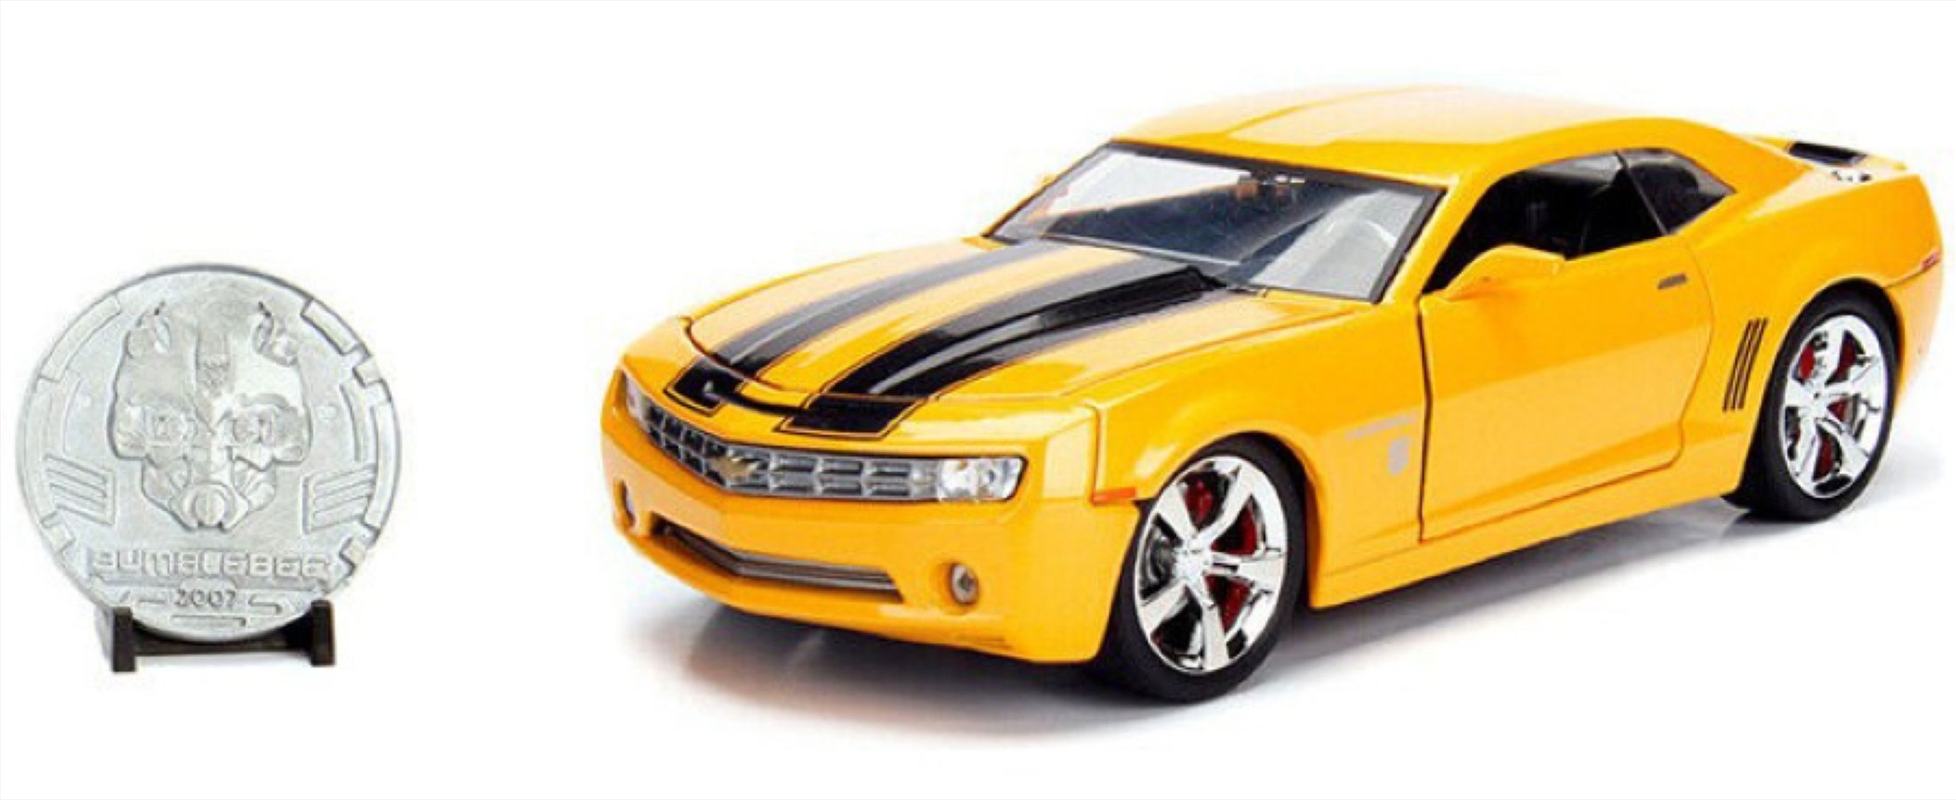 Transformers - Bumblebee 2006 Chevy Camaro 1:24 Scale Hollywood Ride/Product Detail/Figurines